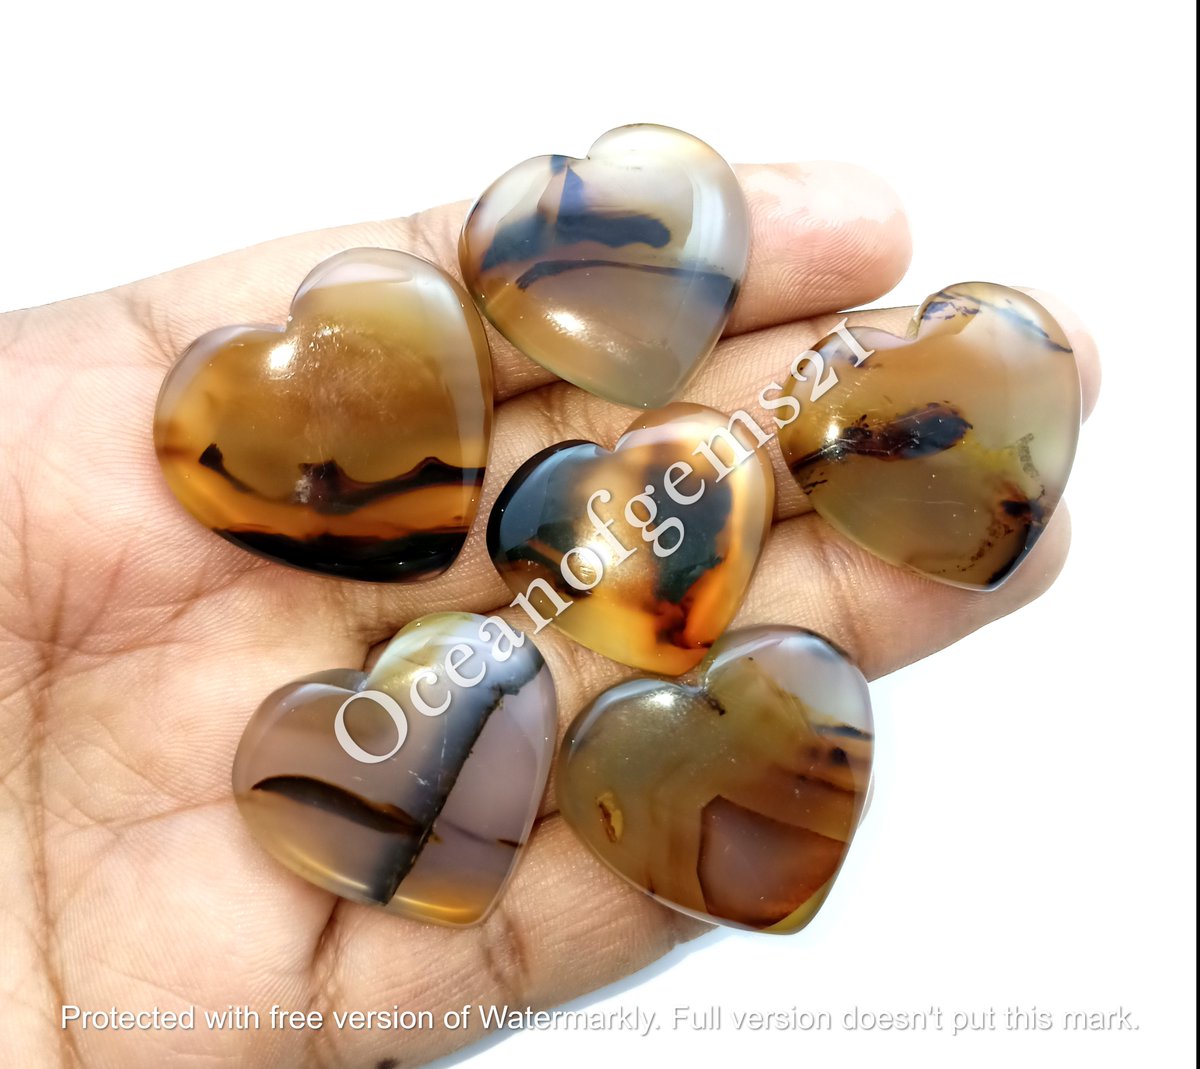 Natural Montana Agate Heart Shape Gemstone Cabochon Dm For Price Size 25 to 35mm Approx Free Drilling Service Worldwide Shipping$6 Combined Shipping Available #montanaagate #agate #agatejewelry #montanaagatecabochon #kambaba #jasper #jaspercabochon #jasperjewelry #heartshaped